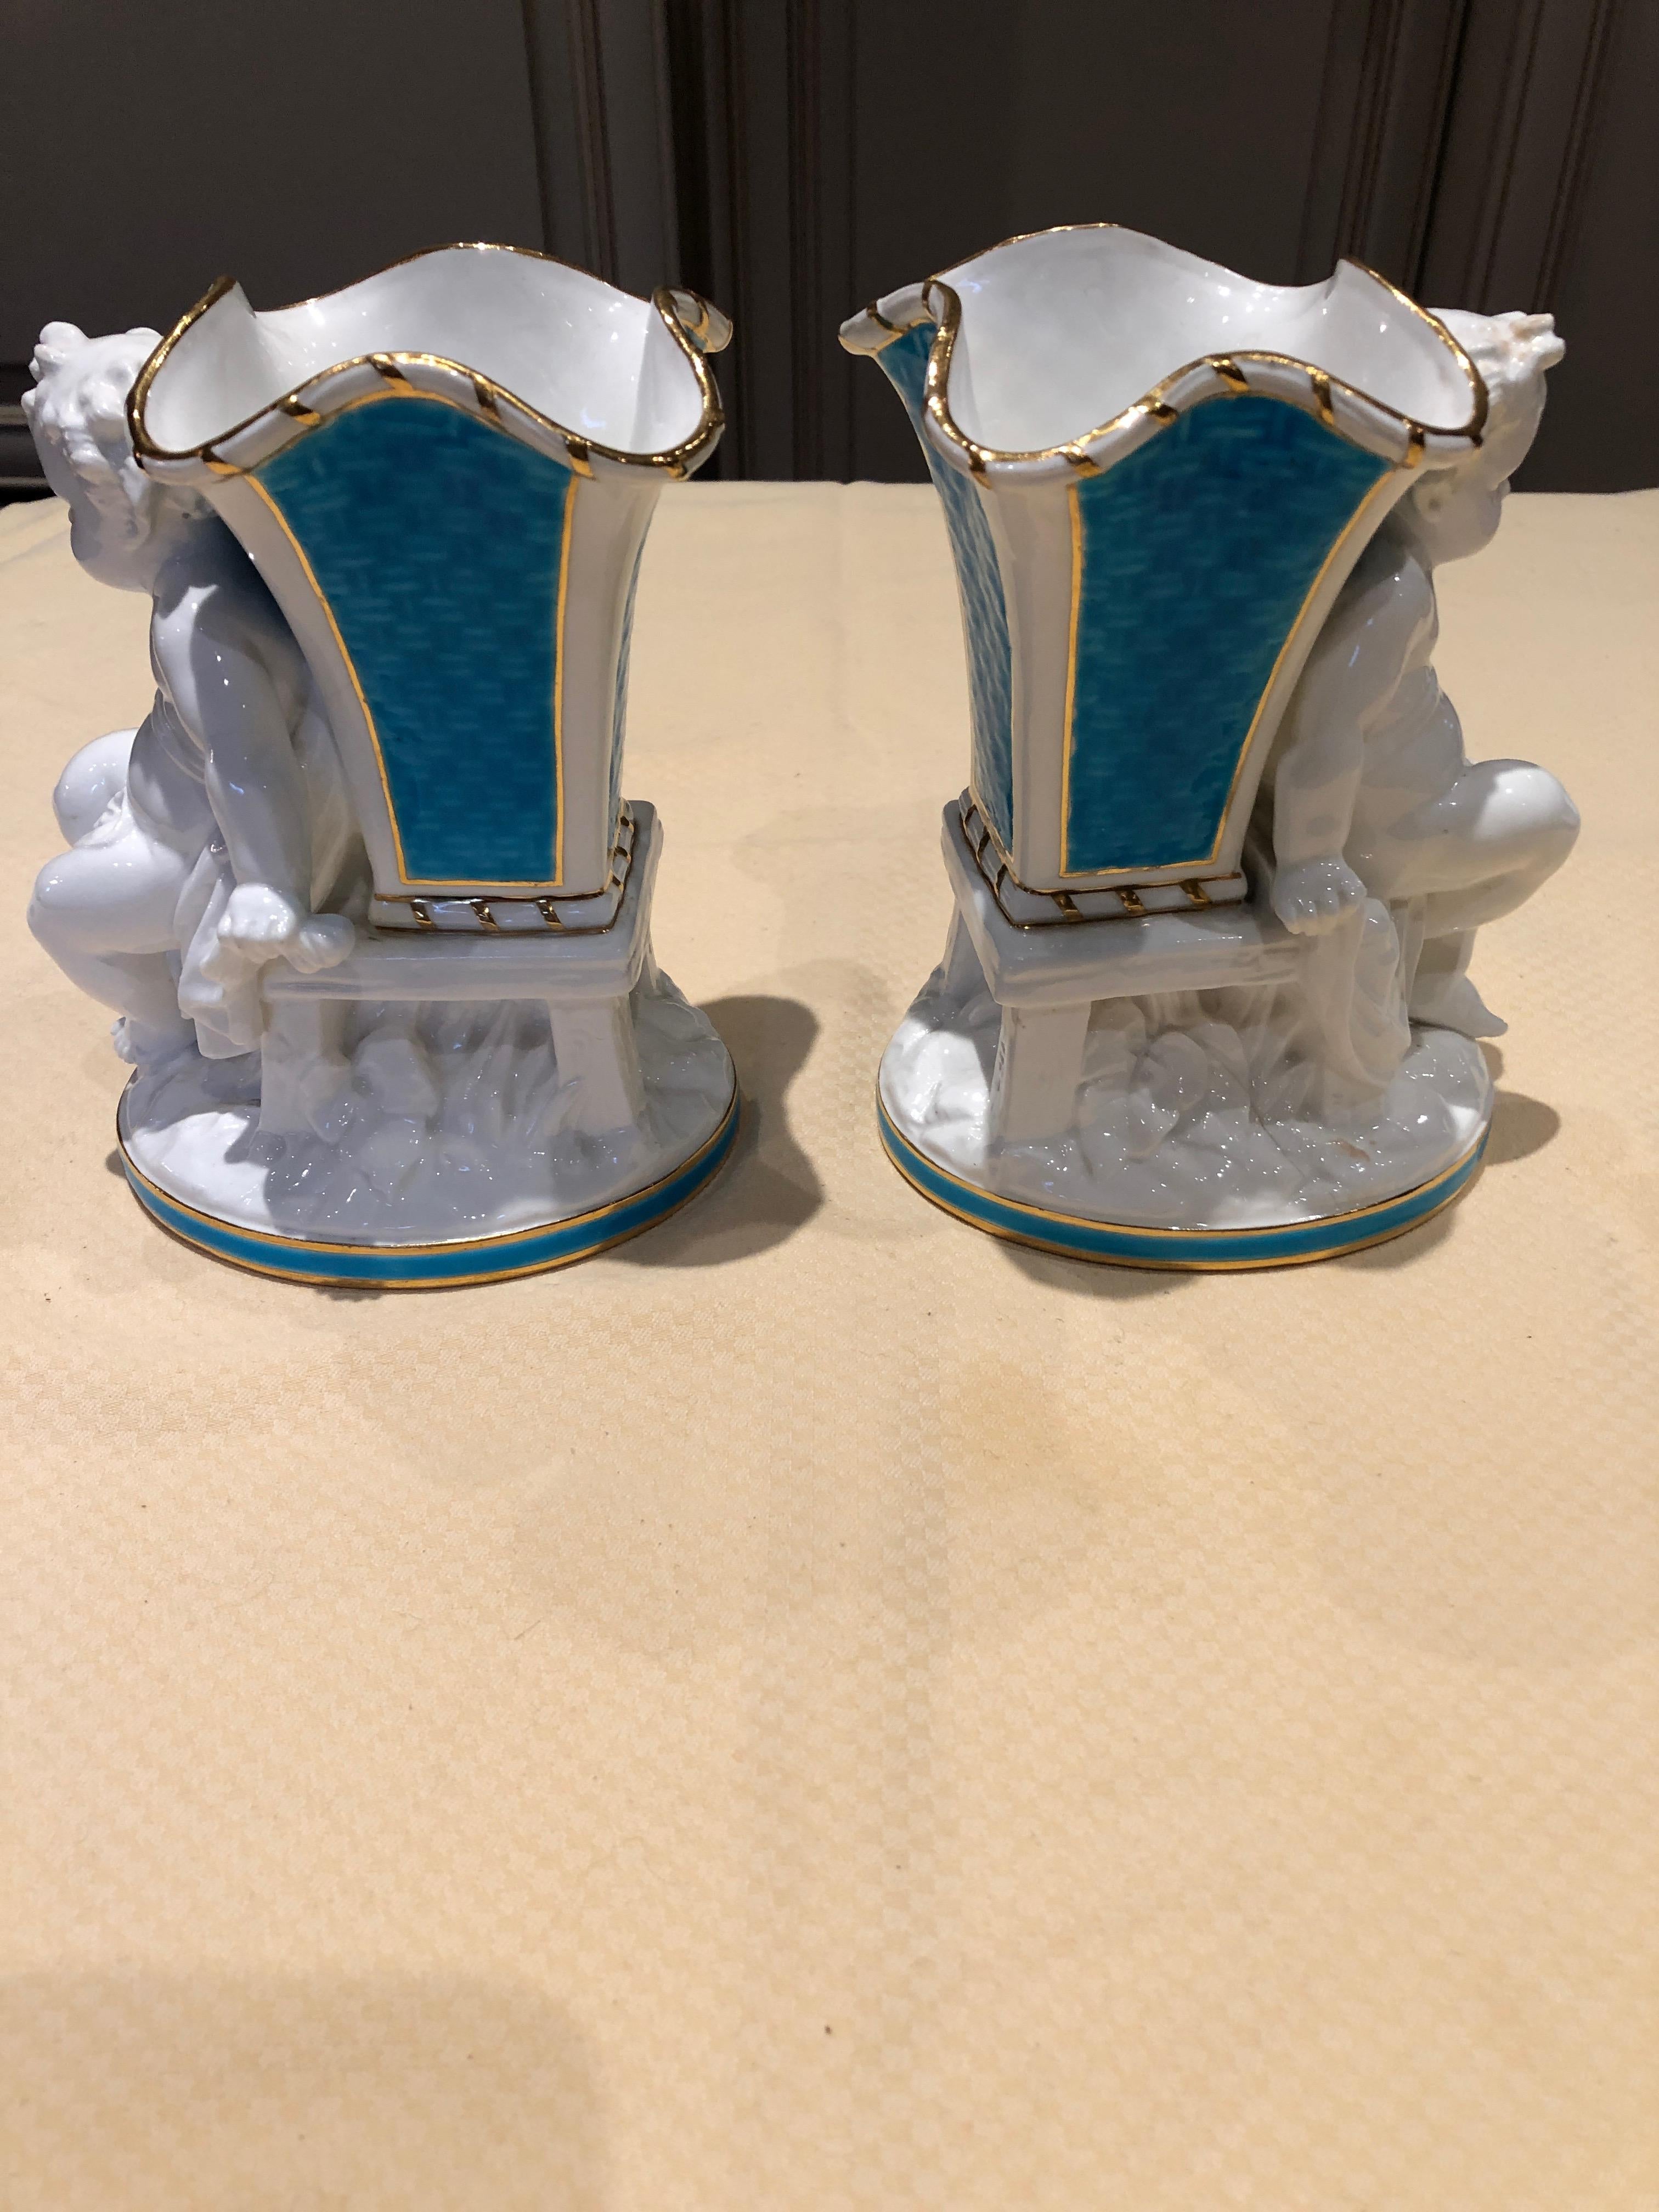 Superb Rare Pair of Cherub Minton Caldwell Tiffany Blue and White Spill Vases For Sale 1